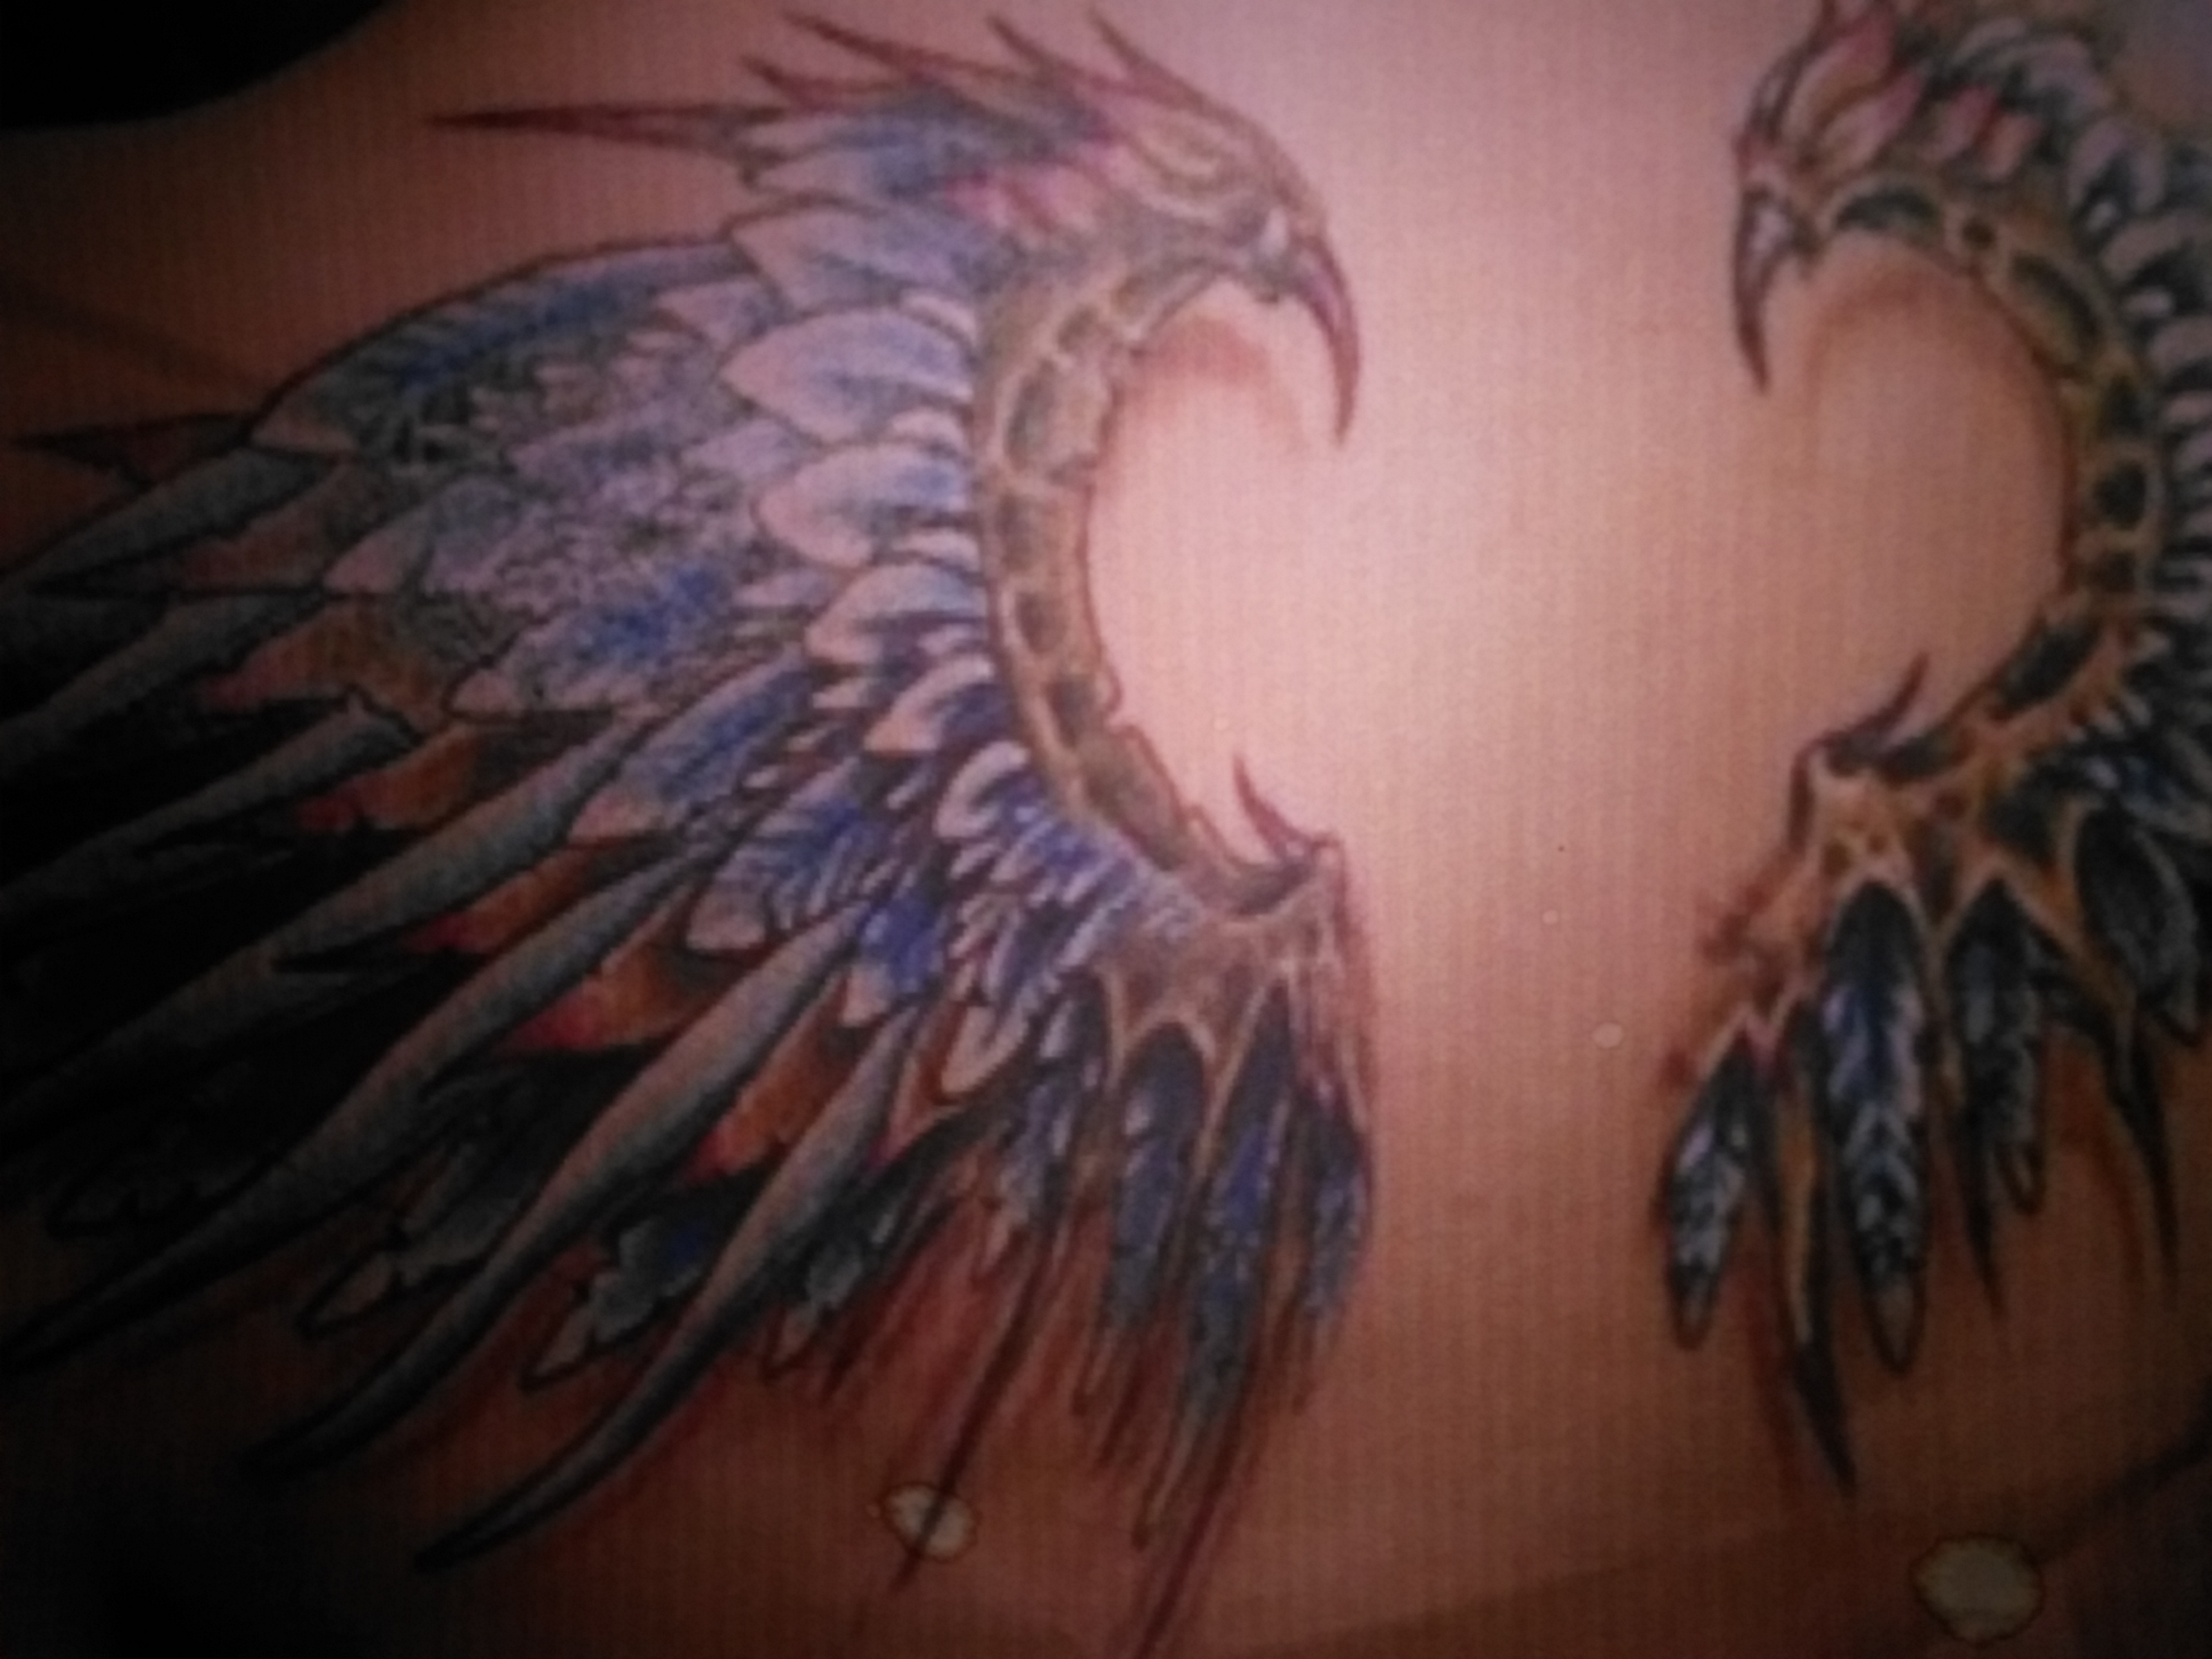 Upper Back Tattoo At Level Of Shoulder Blades Tattoo throughout dimensions 3200 X 2400